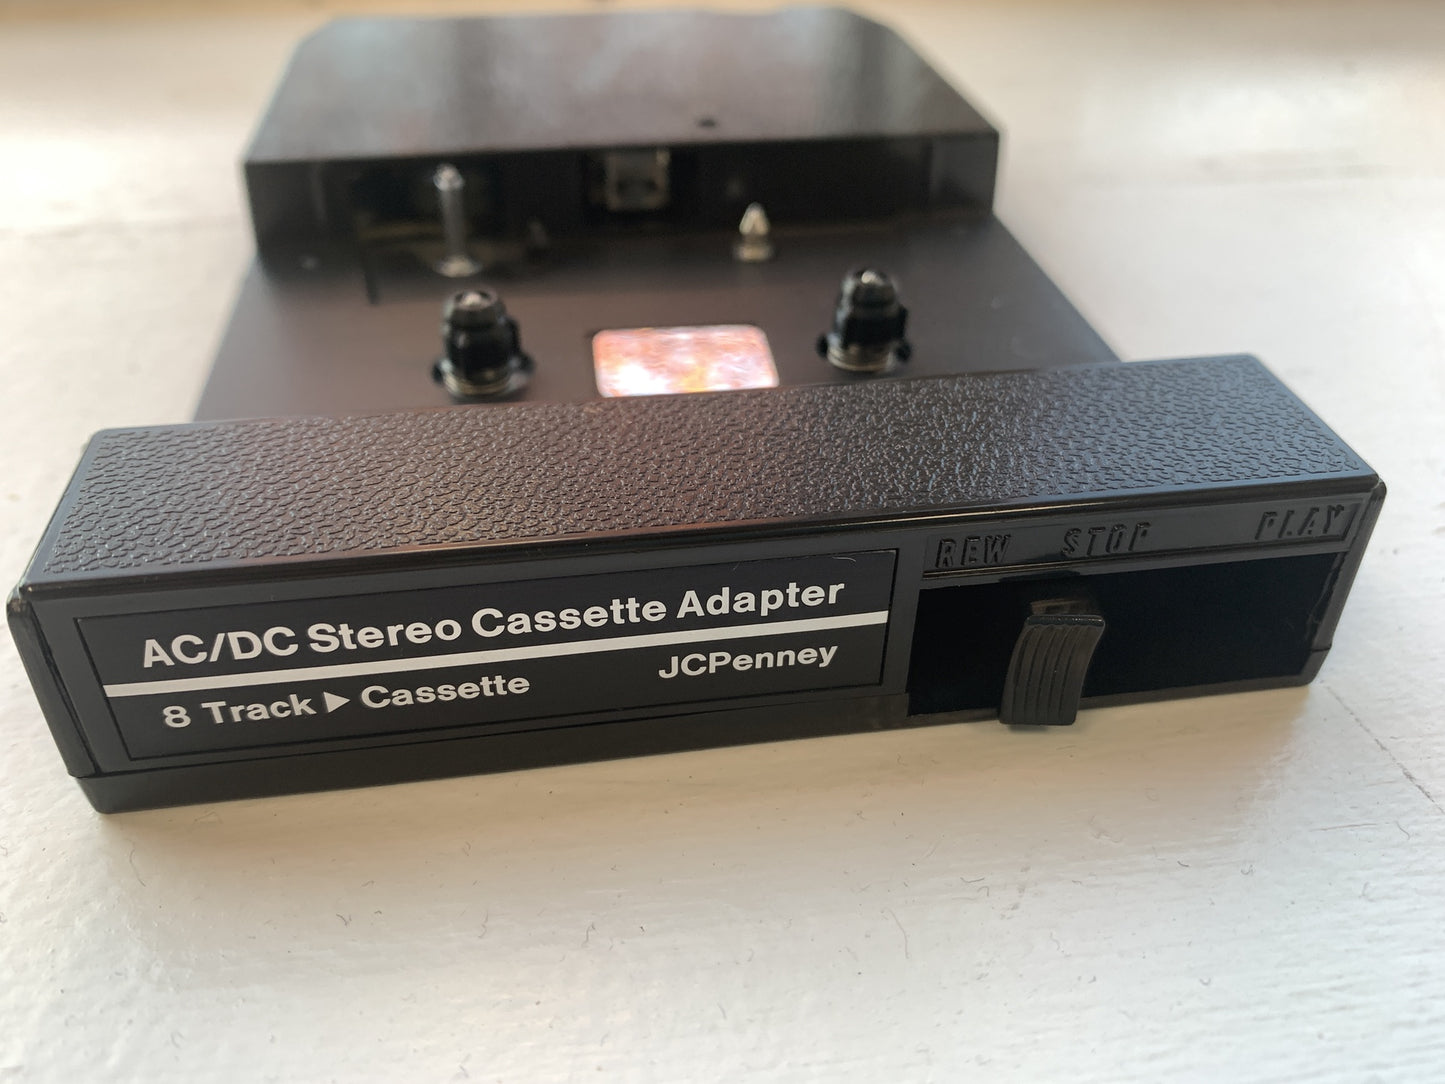 AC/DC Stereo Cassette Adapter Eight Track to Cassette